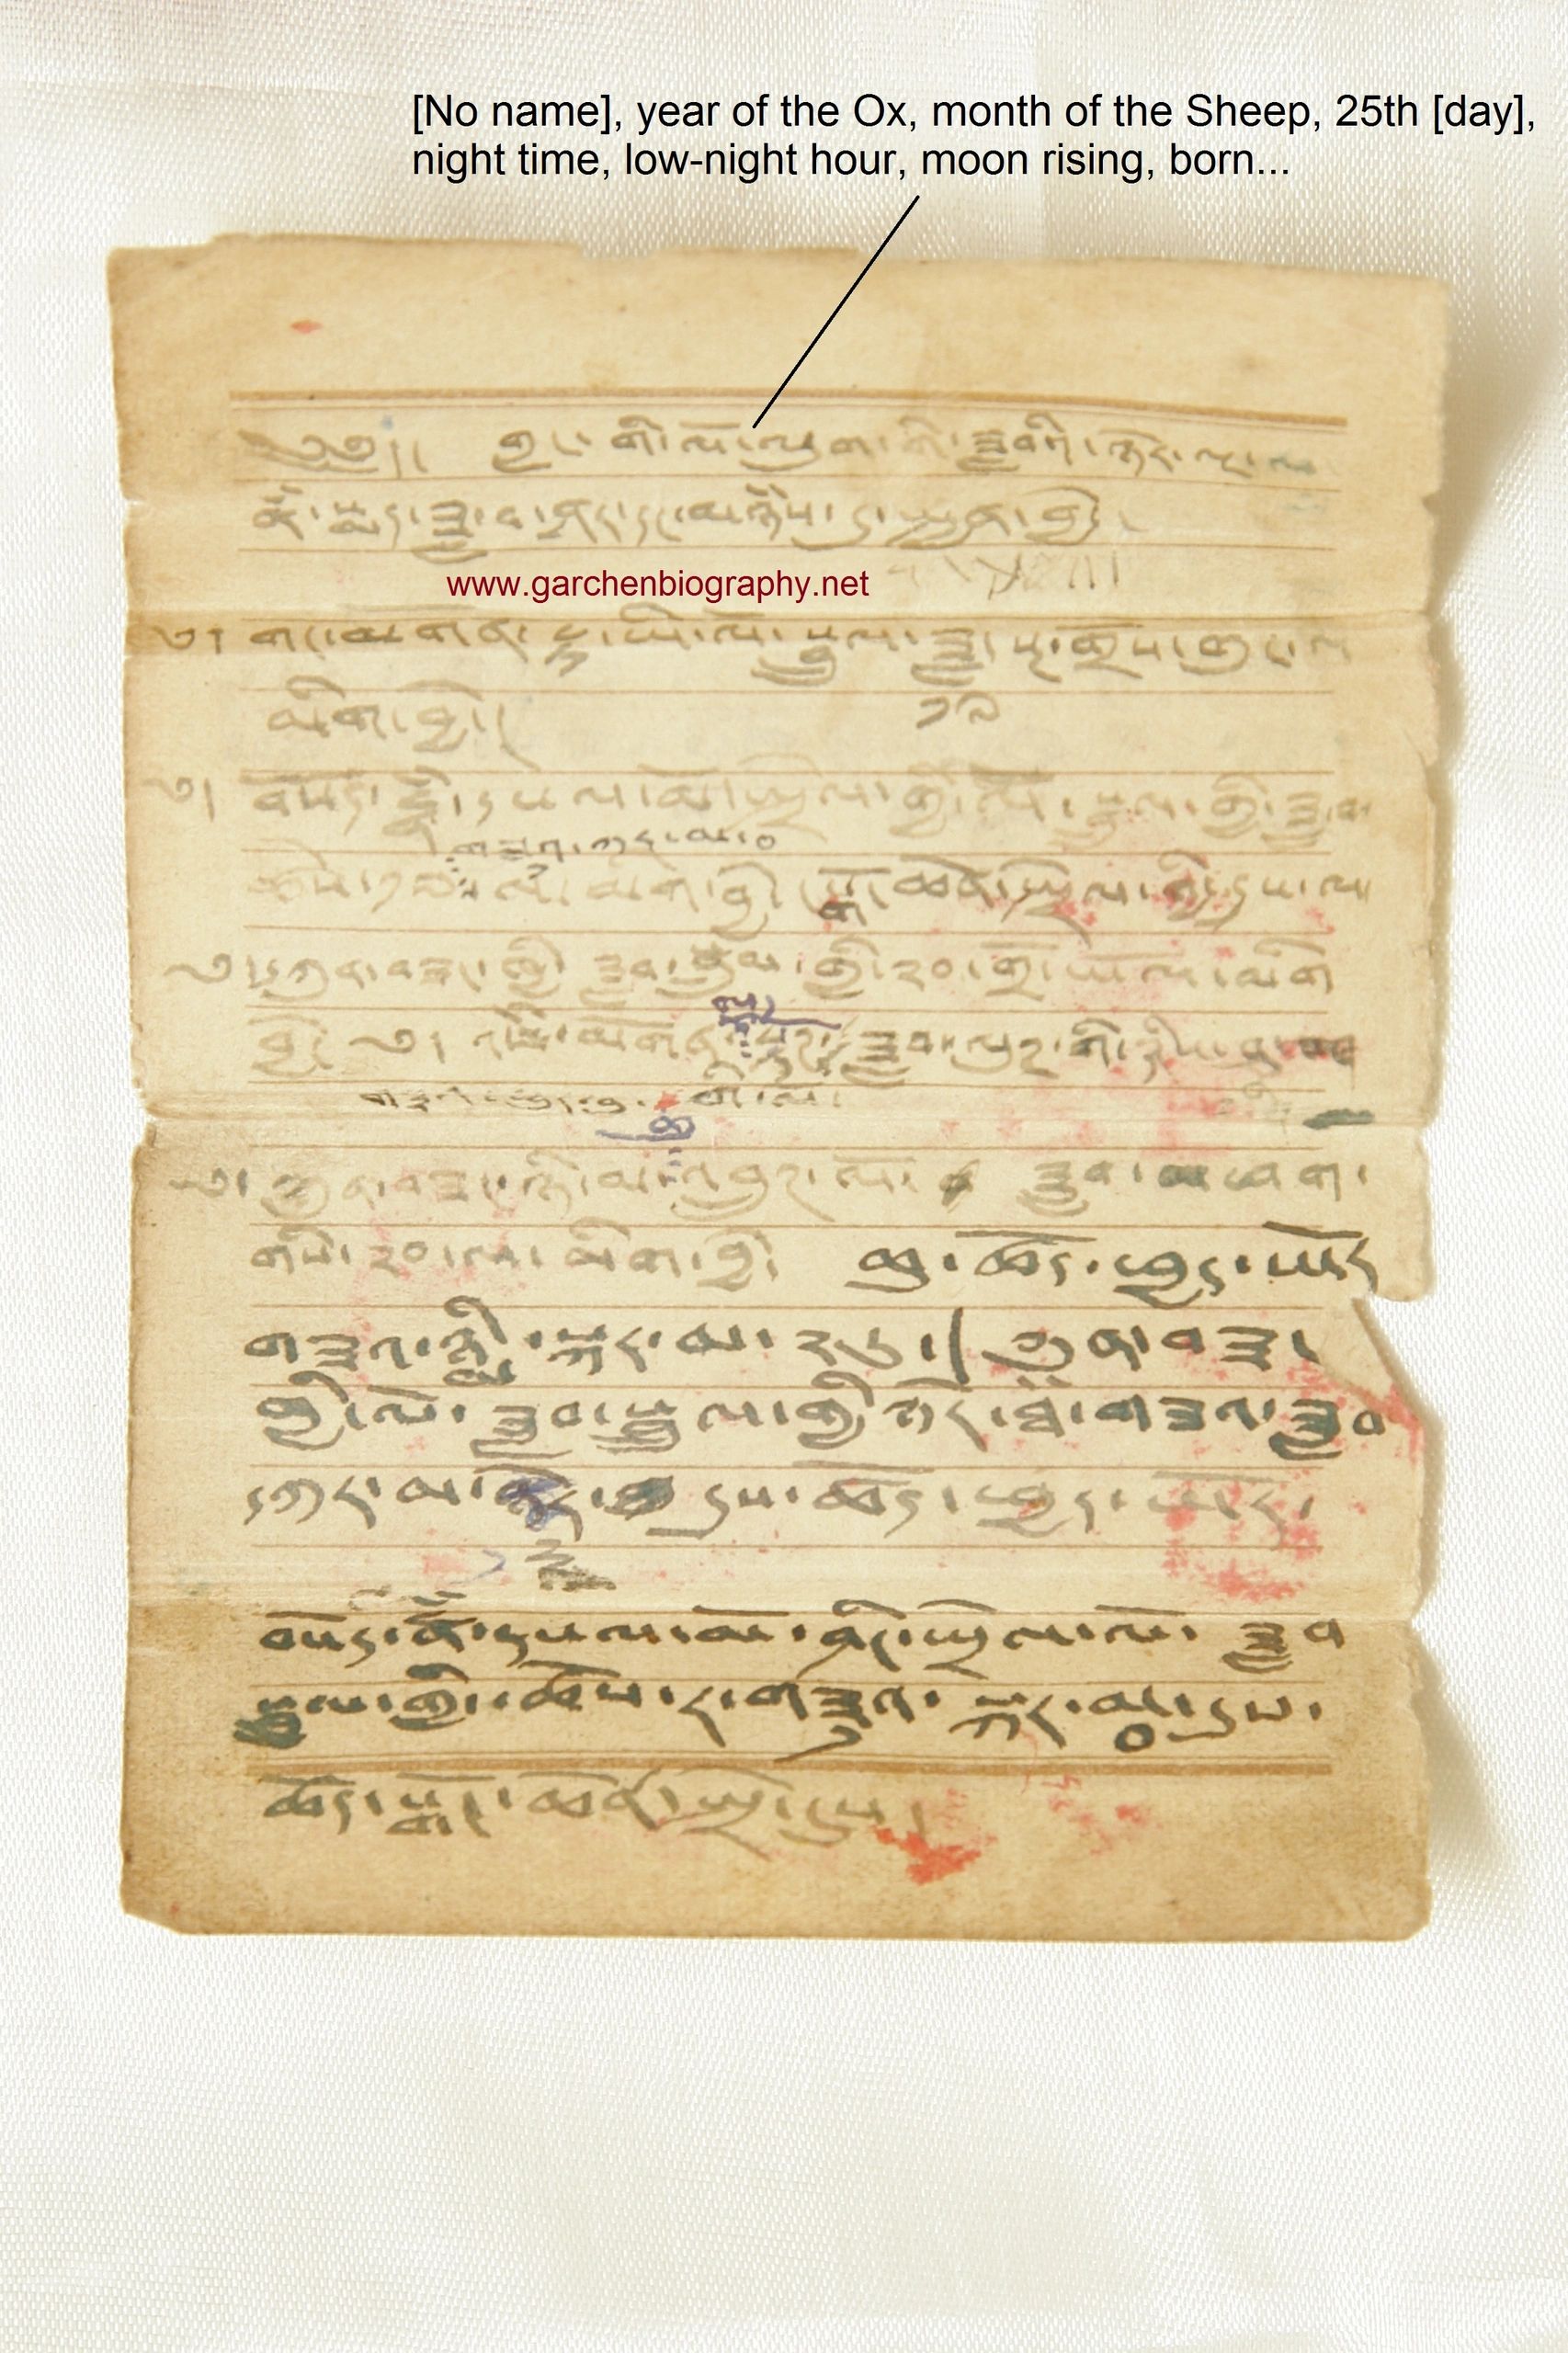 The birth record of the 8th Garchen Rinpoche, Konchog Gyaltsen - a handwritten note by his own fathe